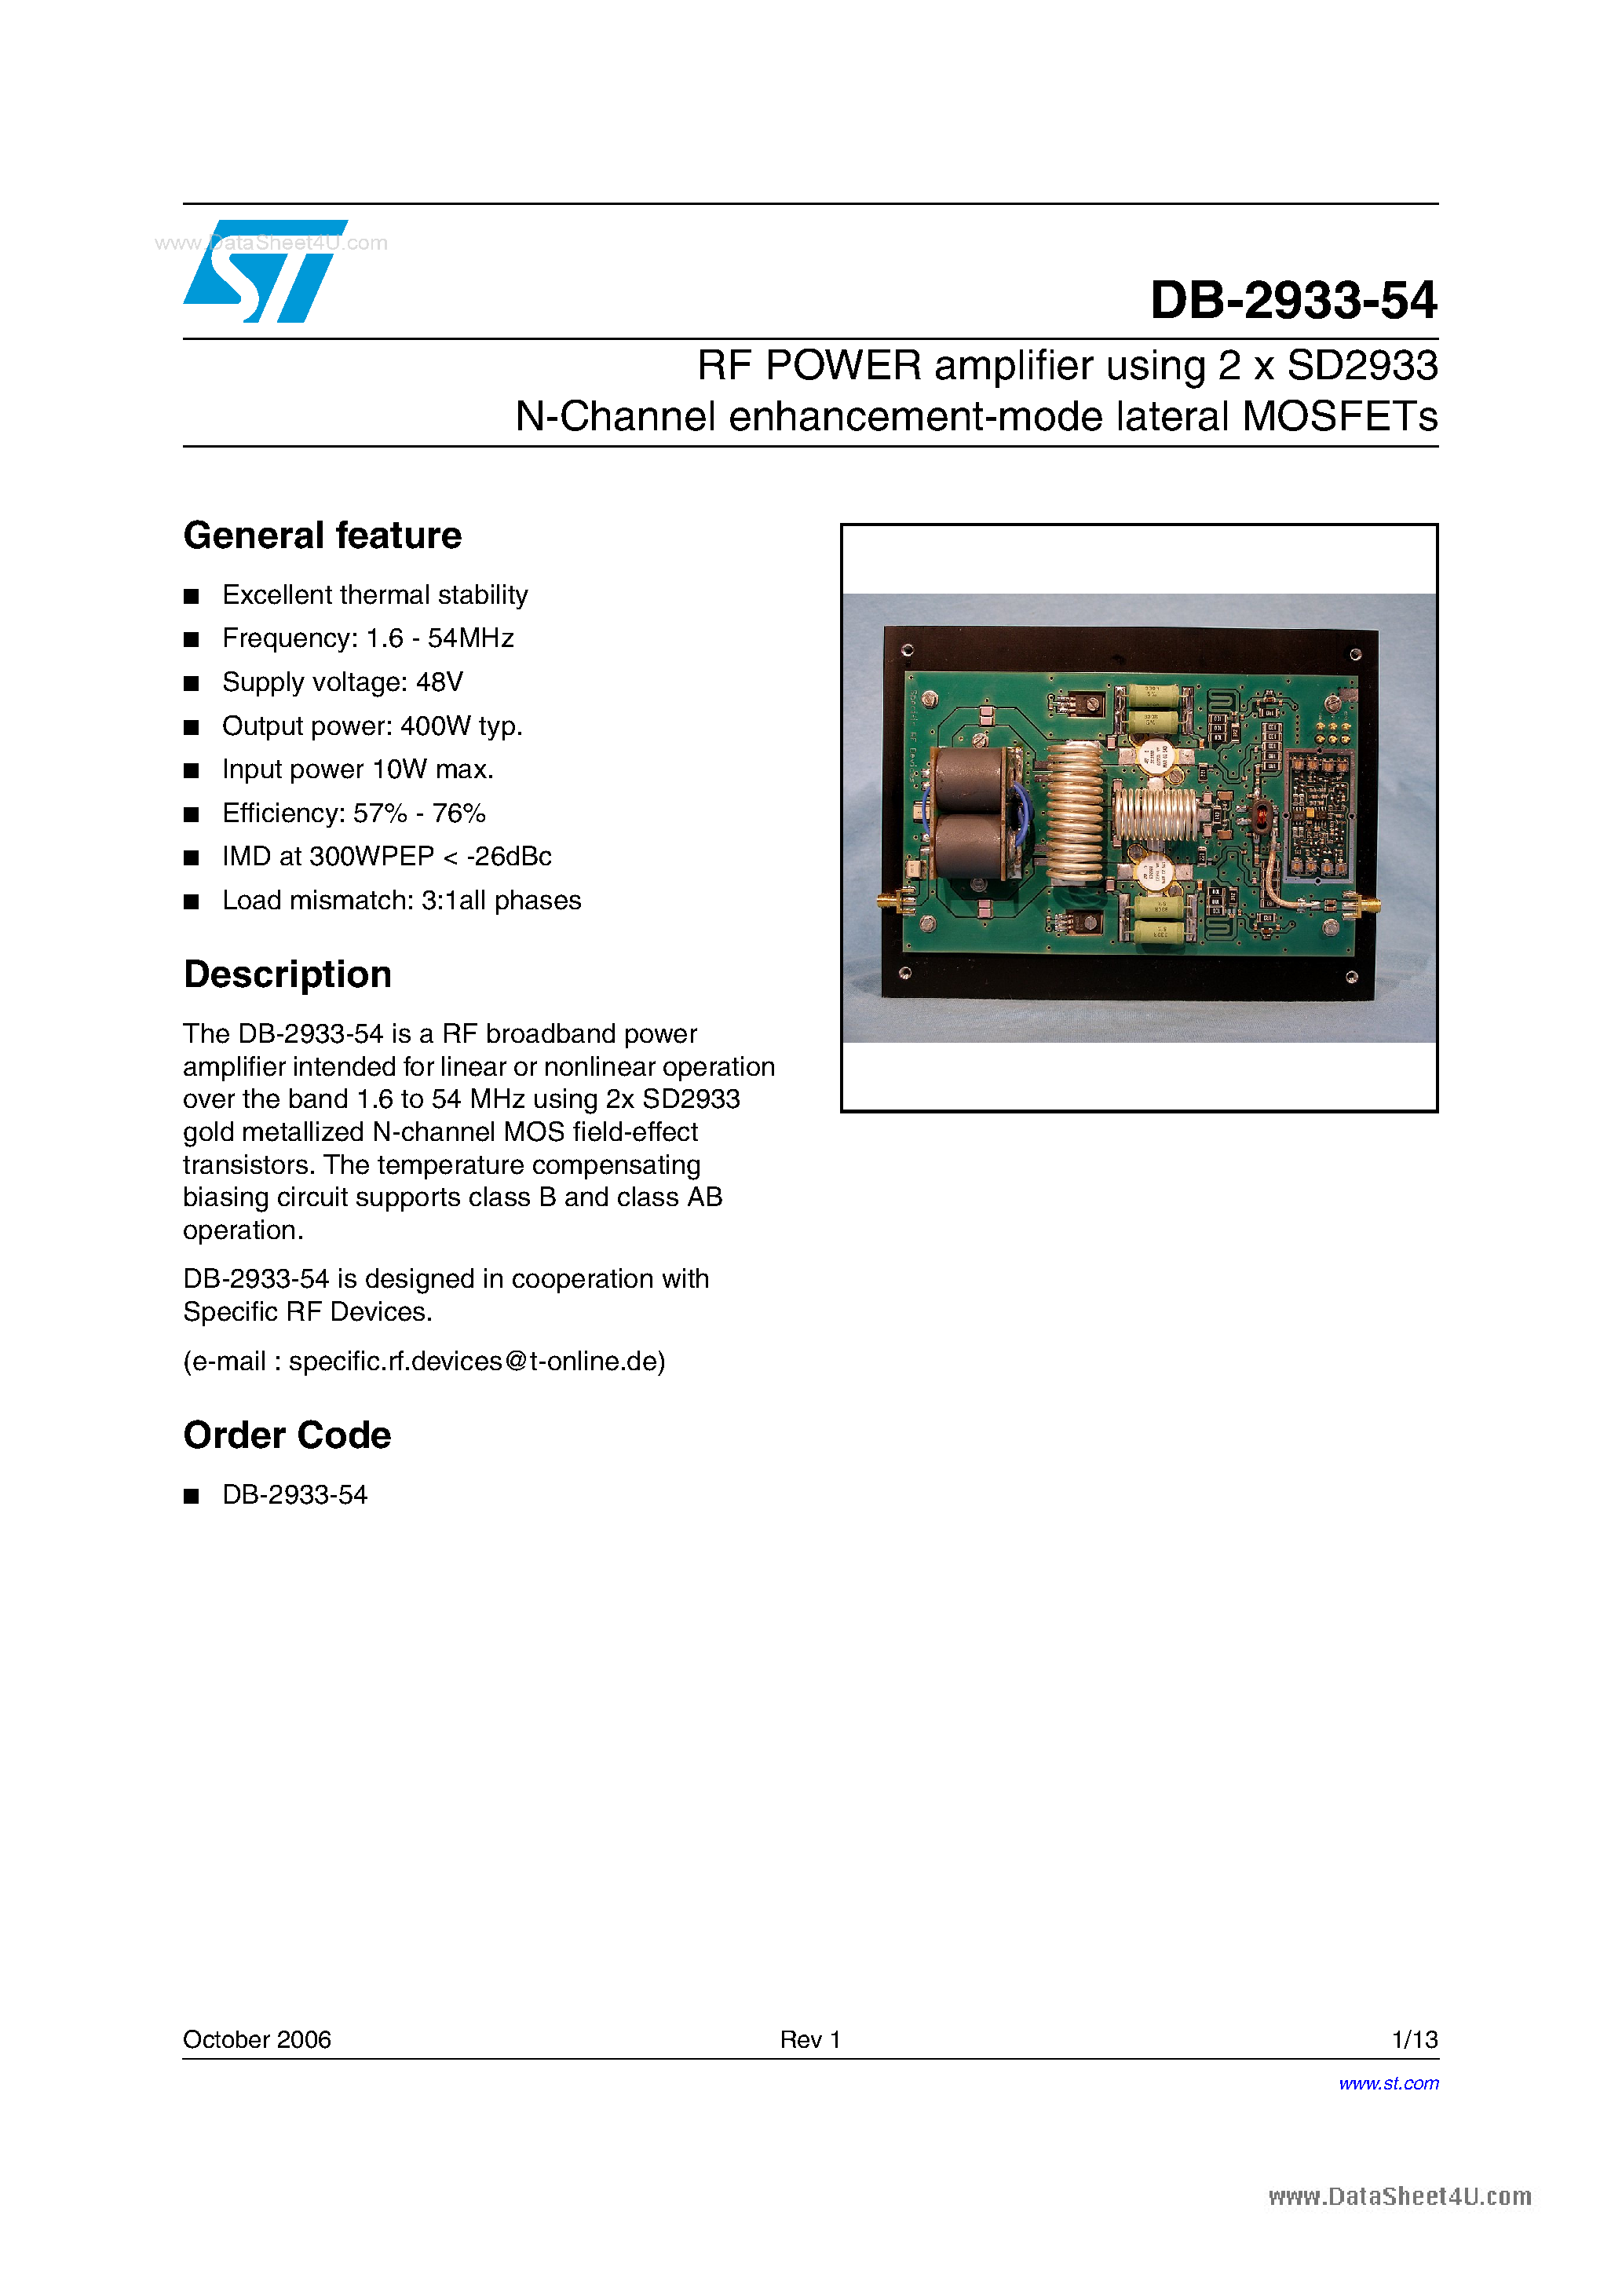 Datasheet DB-2933-54 - RF POWER amplifier using 2 x SD2933 N-Channel enhancement-mode lateral MOSFETs page 1